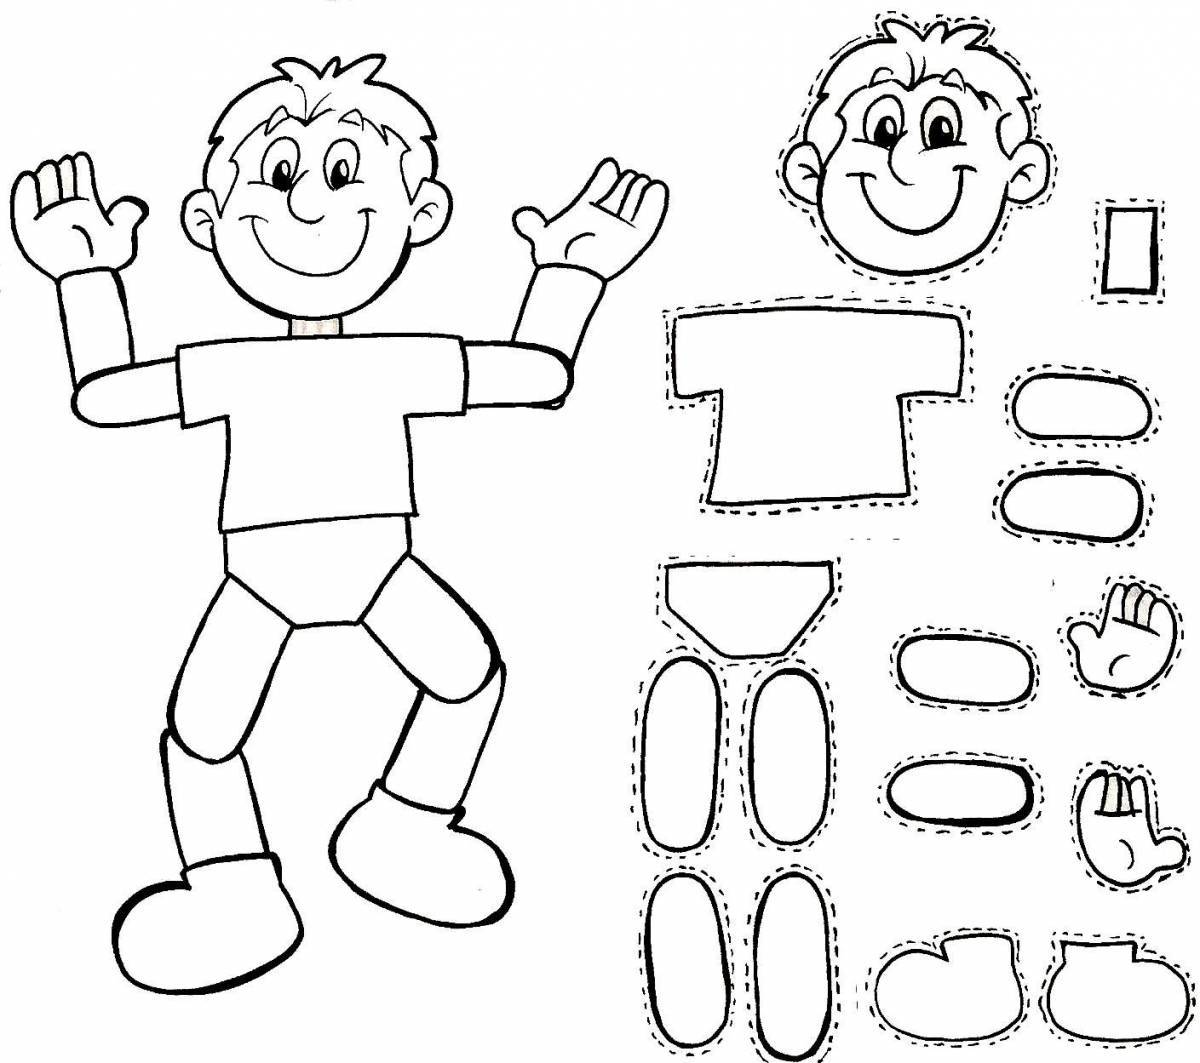 Creative coloring of body parts for kids